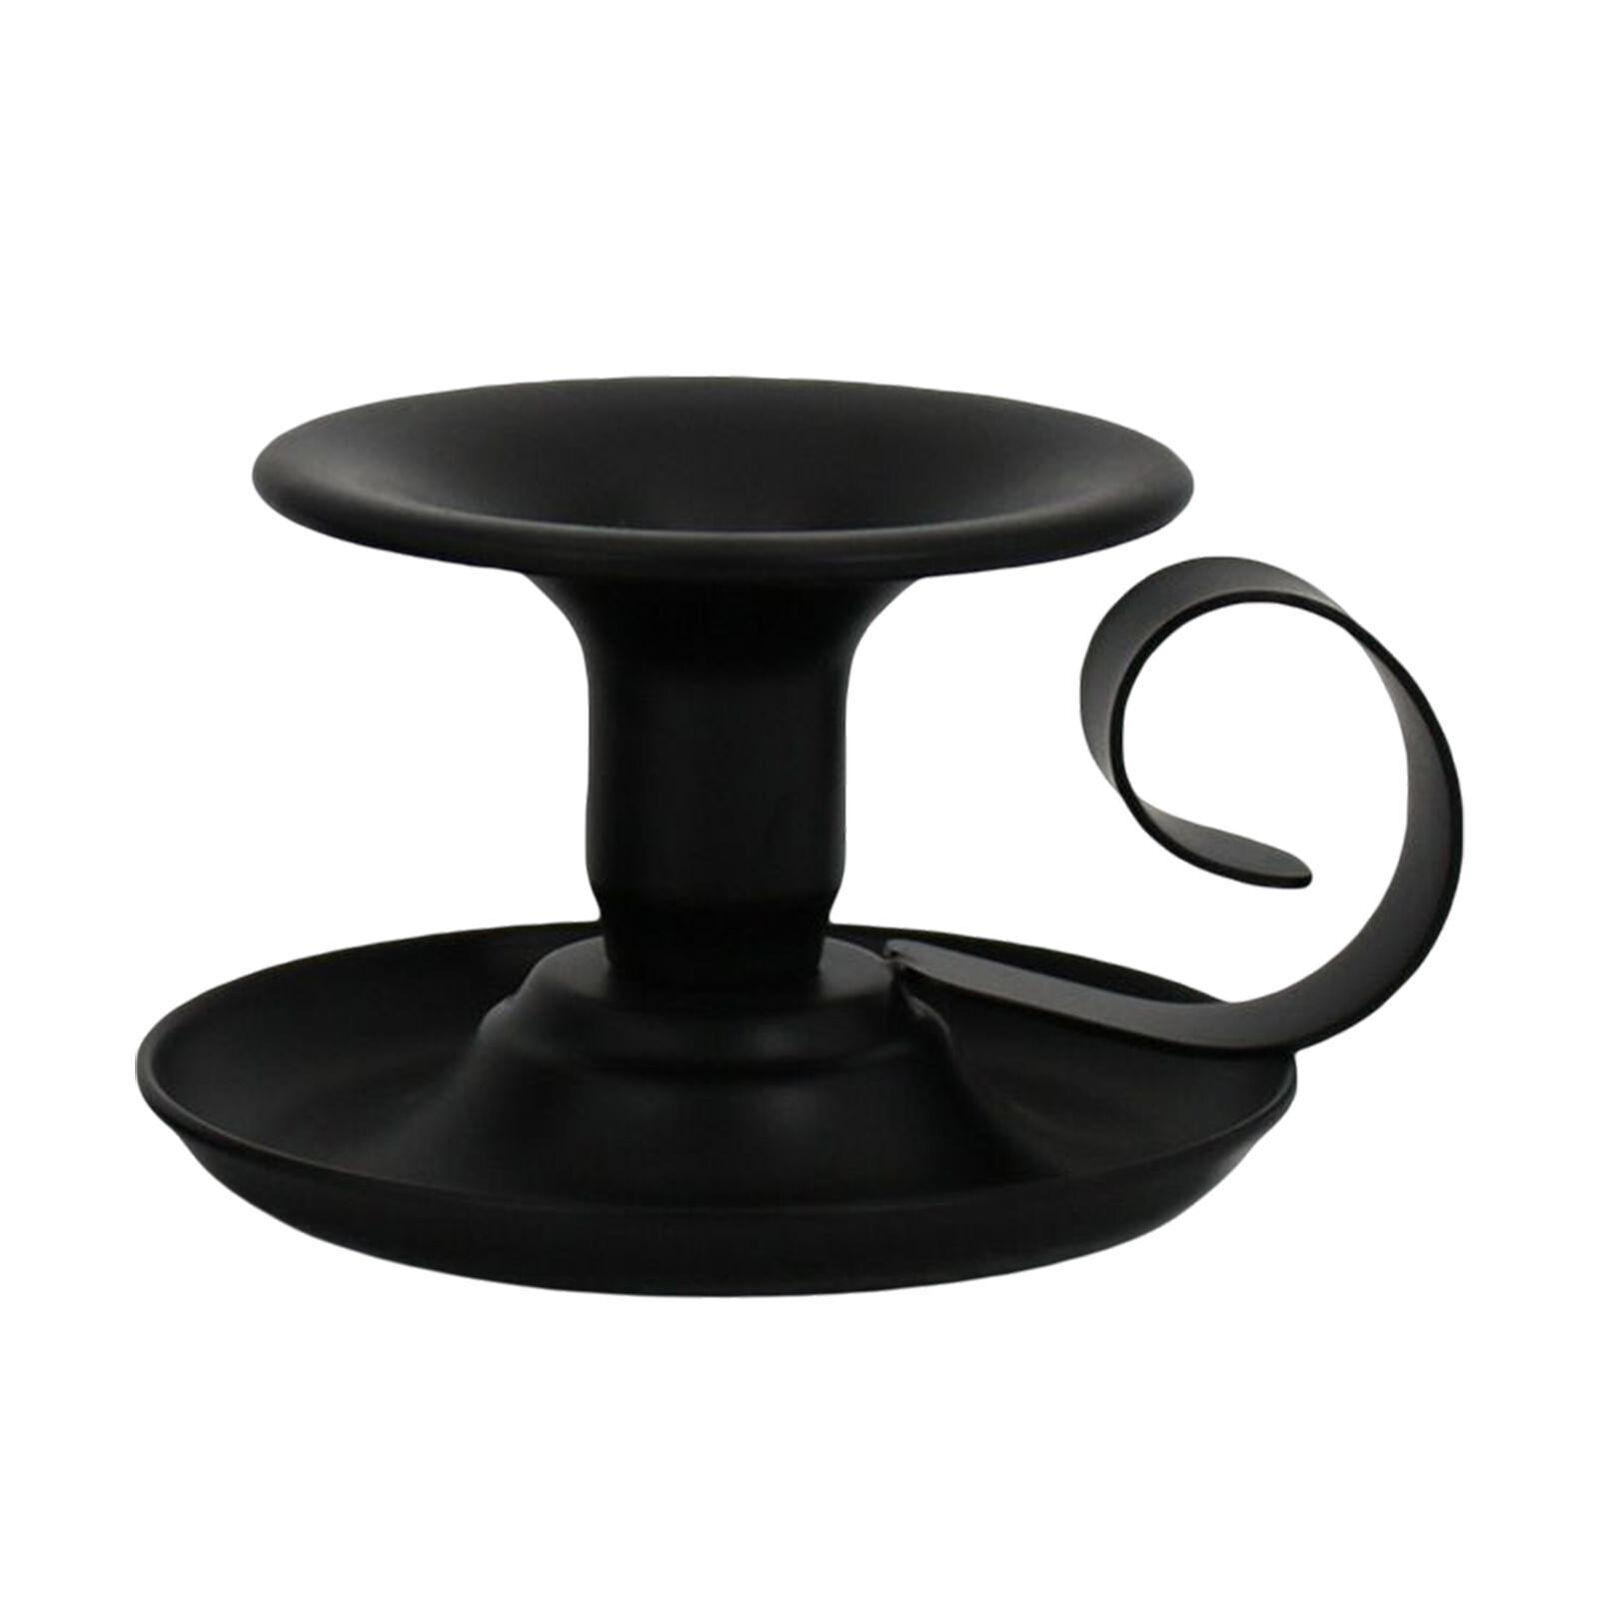 Vintage Wrought Iron Candle Holder The Metal Tapered Candle Base Is Suitable For